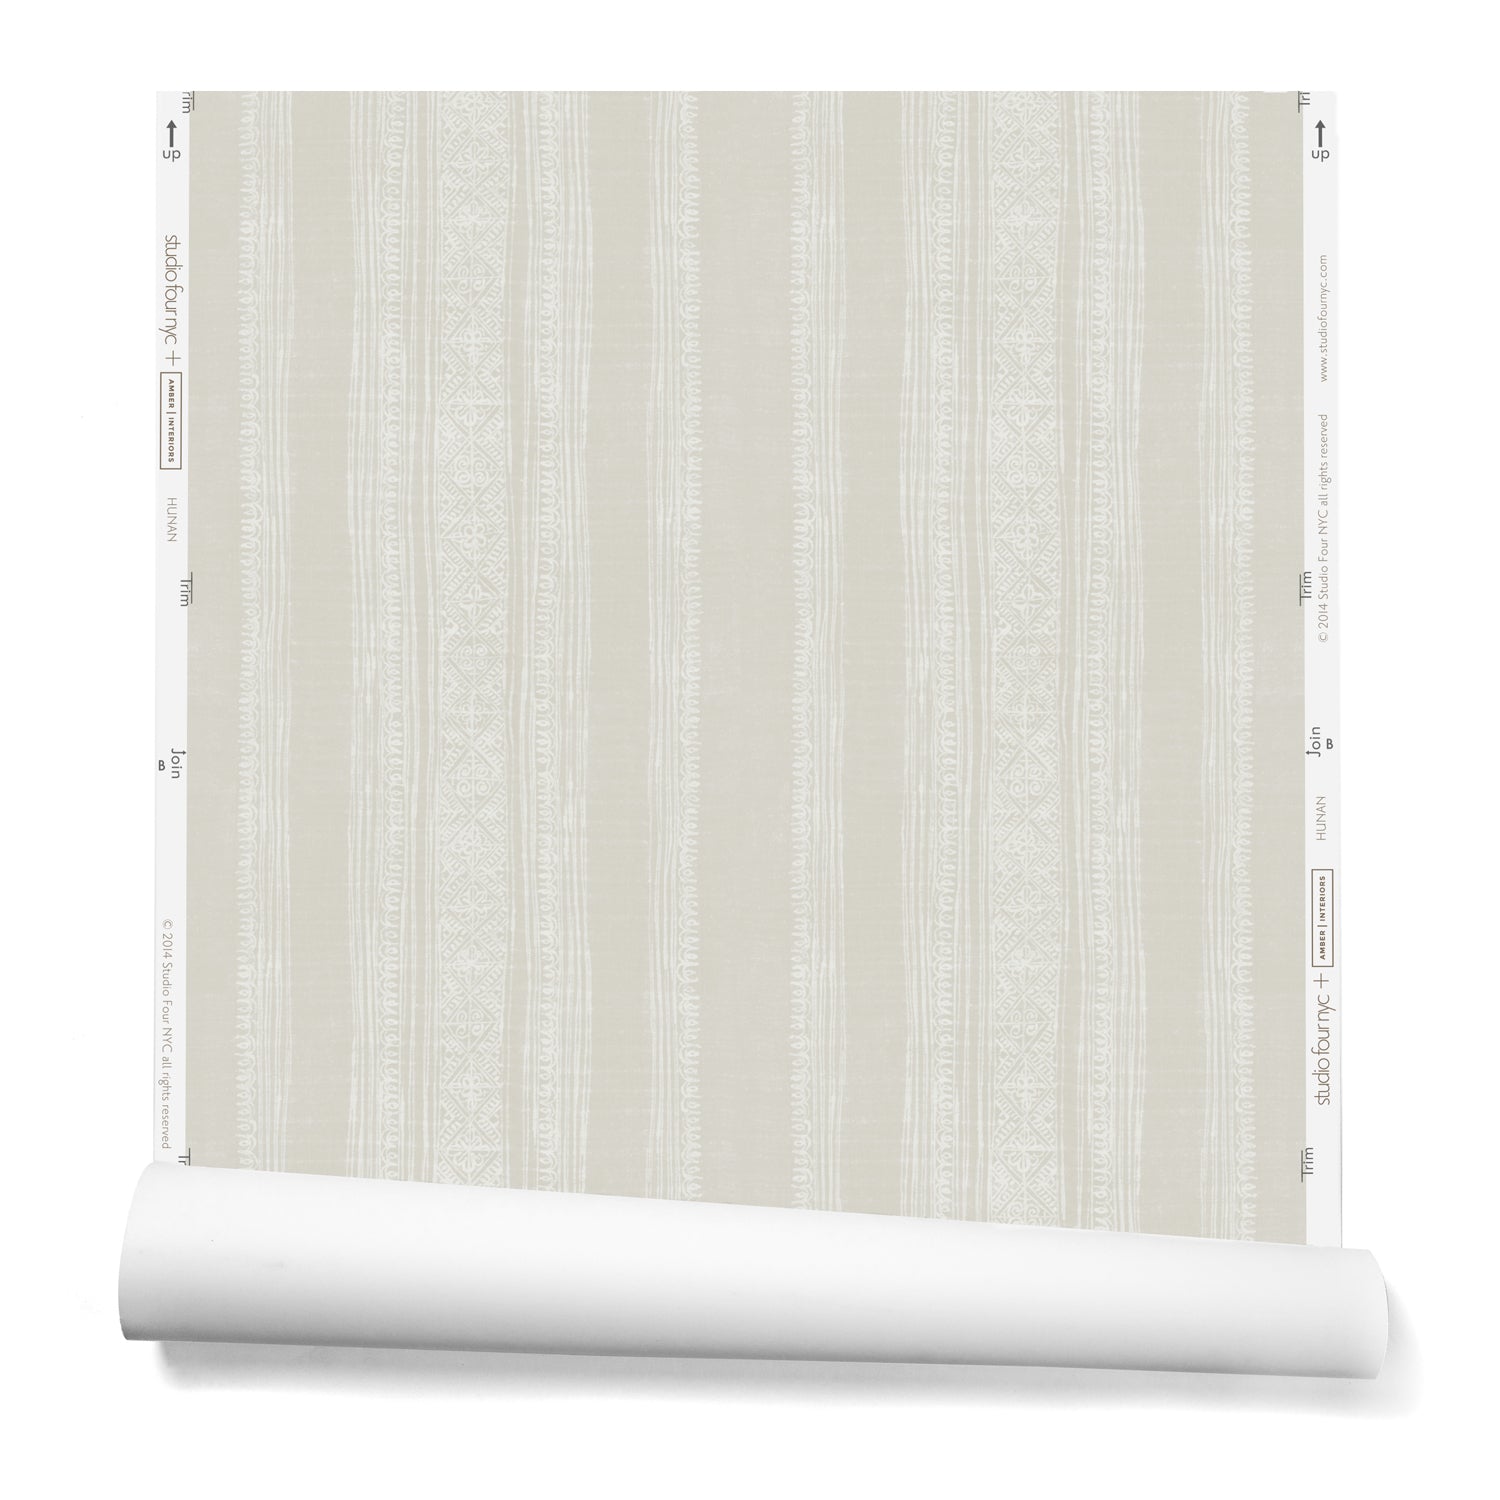 A partially unrolled roll of wallpaper in a striped pattern of intricate white lines over a washed beige background.